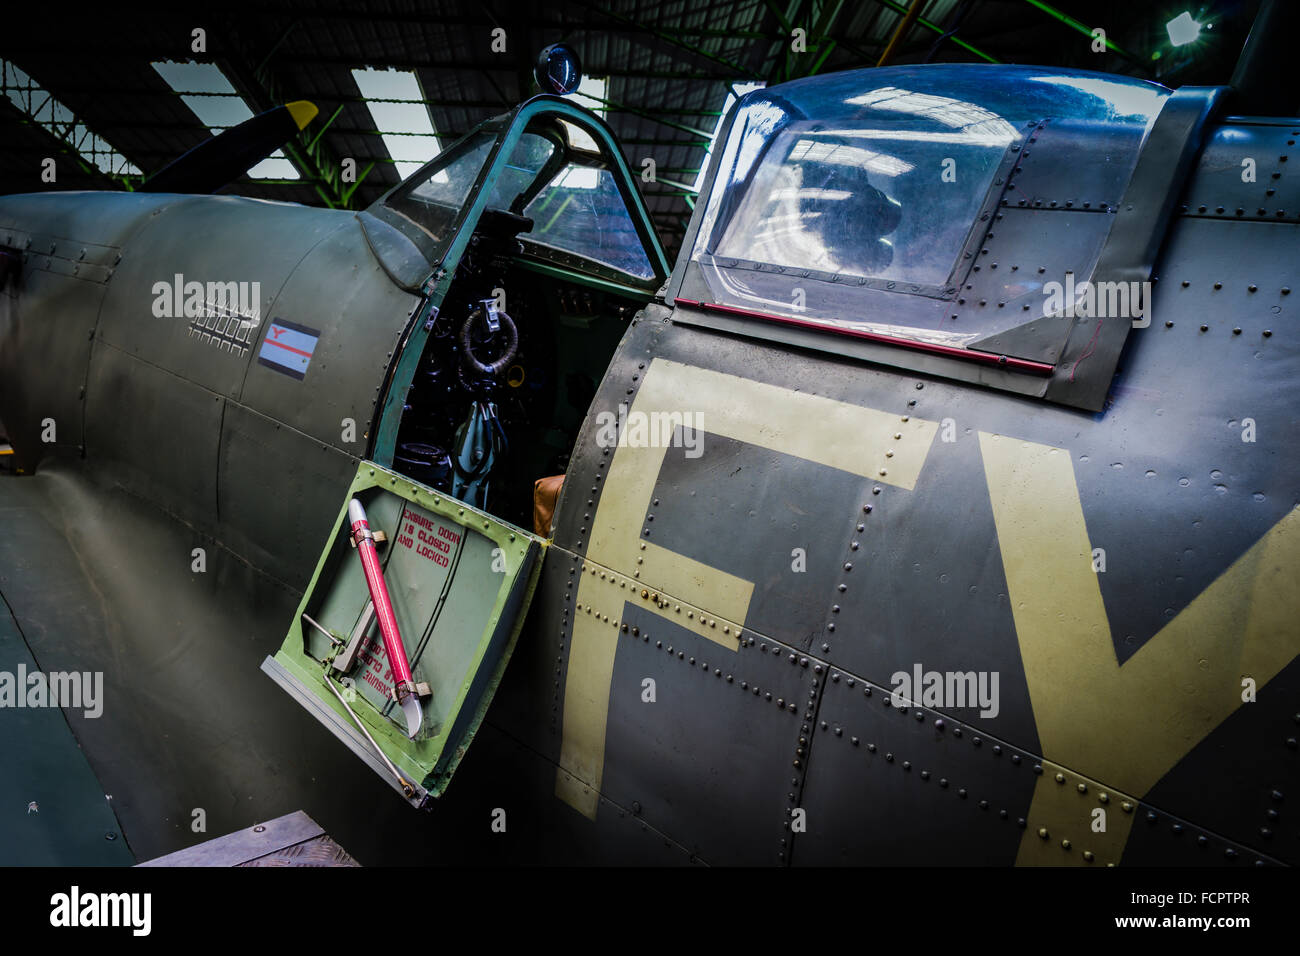 MK9 Spitfire at Spitfire museum, Blackpool Airport, Uk. Stock Photo